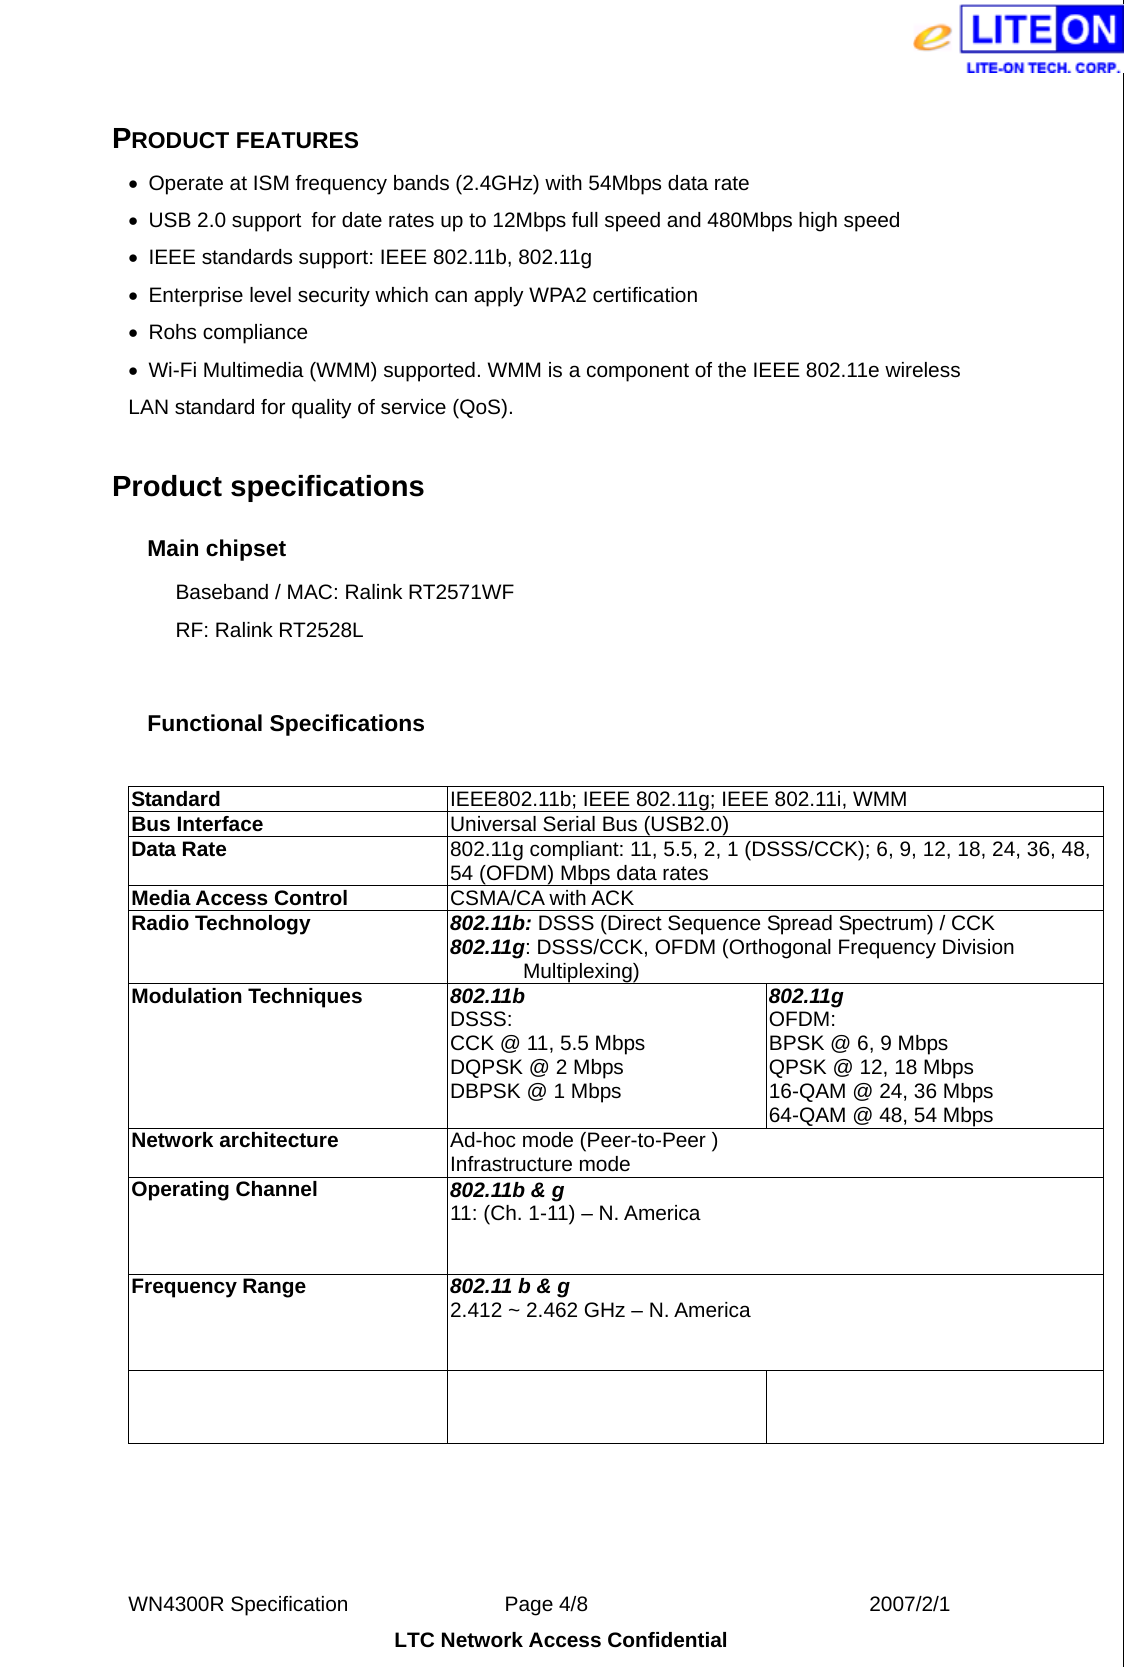  WN4300R Specification               Page 4/8                           2007/2/1 LTC Network Access Confidential  PRODUCT FEATURES •  Operate at ISM frequency bands (2.4GHz) with 54Mbps data rate •  USB 2.0 support  for date rates up to 12Mbps full speed and 480Mbps high speed • IEEE standards support: IEEE 802.11b, 802.11g   •  Enterprise level security which can apply WPA2 certification • Rohs compliance •  Wi-Fi Multimedia (WMM) supported. WMM is a component of the IEEE 802.11e wireless LAN standard for quality of service (QoS).  Product specifications   Main chipset Baseband / MAC: Ralink RT2571WF   RF: Ralink RT2528L  Functional Specifications  Standard   IEEE802.11b; IEEE 802.11g; IEEE 802.11i, WMM Bus Interface  Universal Serial Bus (USB2.0) Data Rate    802.11g compliant: 11, 5.5, 2, 1 (DSSS/CCK); 6, 9, 12, 18, 24, 36, 48, 54 (OFDM) Mbps data rates Media Access Control  CSMA/CA with ACK Radio Technology  802.11b: DSSS (Direct Sequence Spread Spectrum) / CCK 802.11g: DSSS/CCK, OFDM (Orthogonal Frequency Division   Multiplexing) Modulation Techniques  802.11b DSSS: CCK @ 11, 5.5 Mbps DQPSK @ 2 Mbps DBPSK @ 1 Mbps 802.11g OFDM: BPSK @ 6, 9 Mbps QPSK @ 12, 18 Mbps 16-QAM @ 24, 36 Mbps 64-QAM @ 48, 54 Mbps Network architecture  Ad-hoc mode (Peer-to-Peer ) Infrastructure mode Operating Channel  802.11b &amp; g 11: (Ch. 1-11) – N. America 14: (Ch. 1-14) – Japan 13: (Ch. 1-13) – Europe ETSI Frequency Range    802.11 b &amp; g 2.412 ~ 2.462 GHz – N. America 2.412 ~ 2.484 GHz – Japan 2.412 ~ 2.472 GHz – Europe ETSI Transmit Output Power    802.11b 17 +-1.5 dBm  802.11 g 15 +-1.5 dBm 